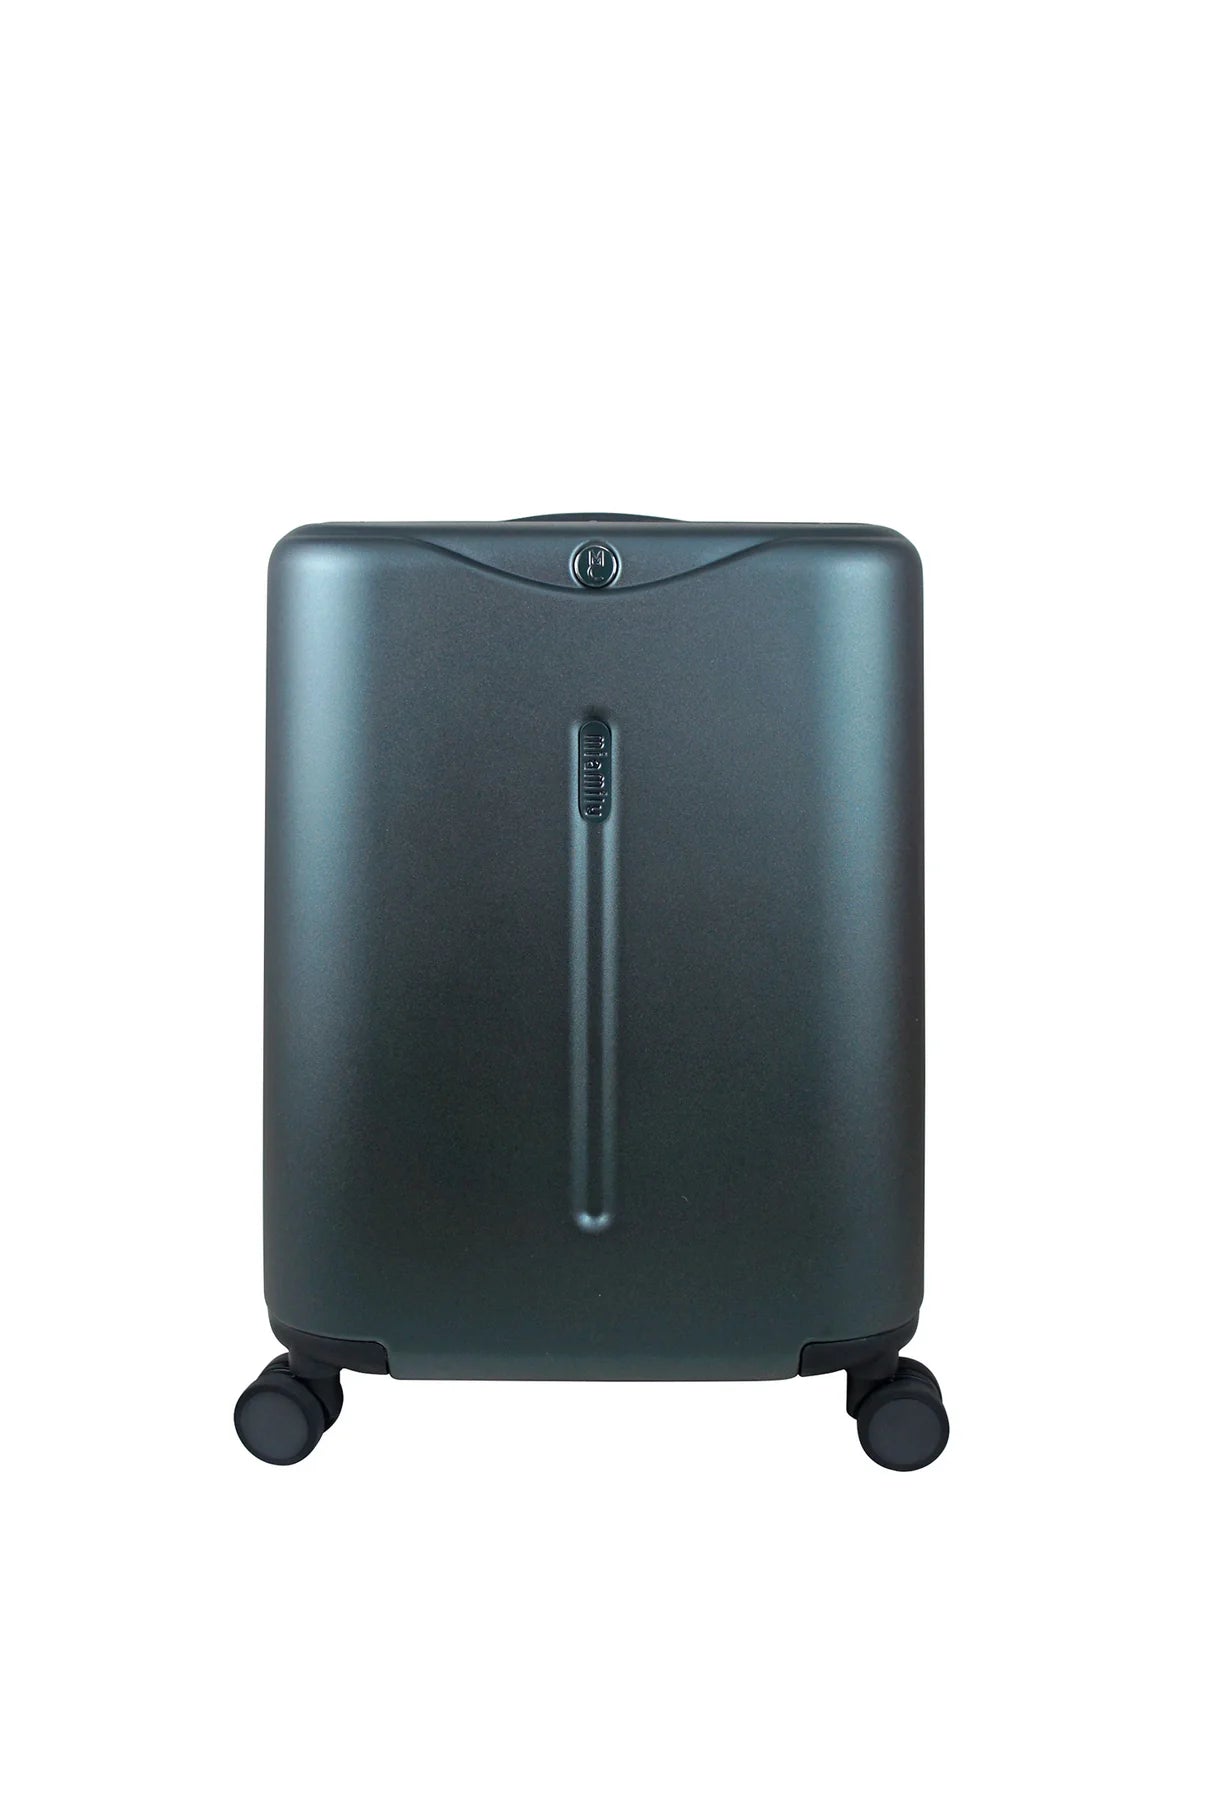 miamily 24 inch luggage forest green